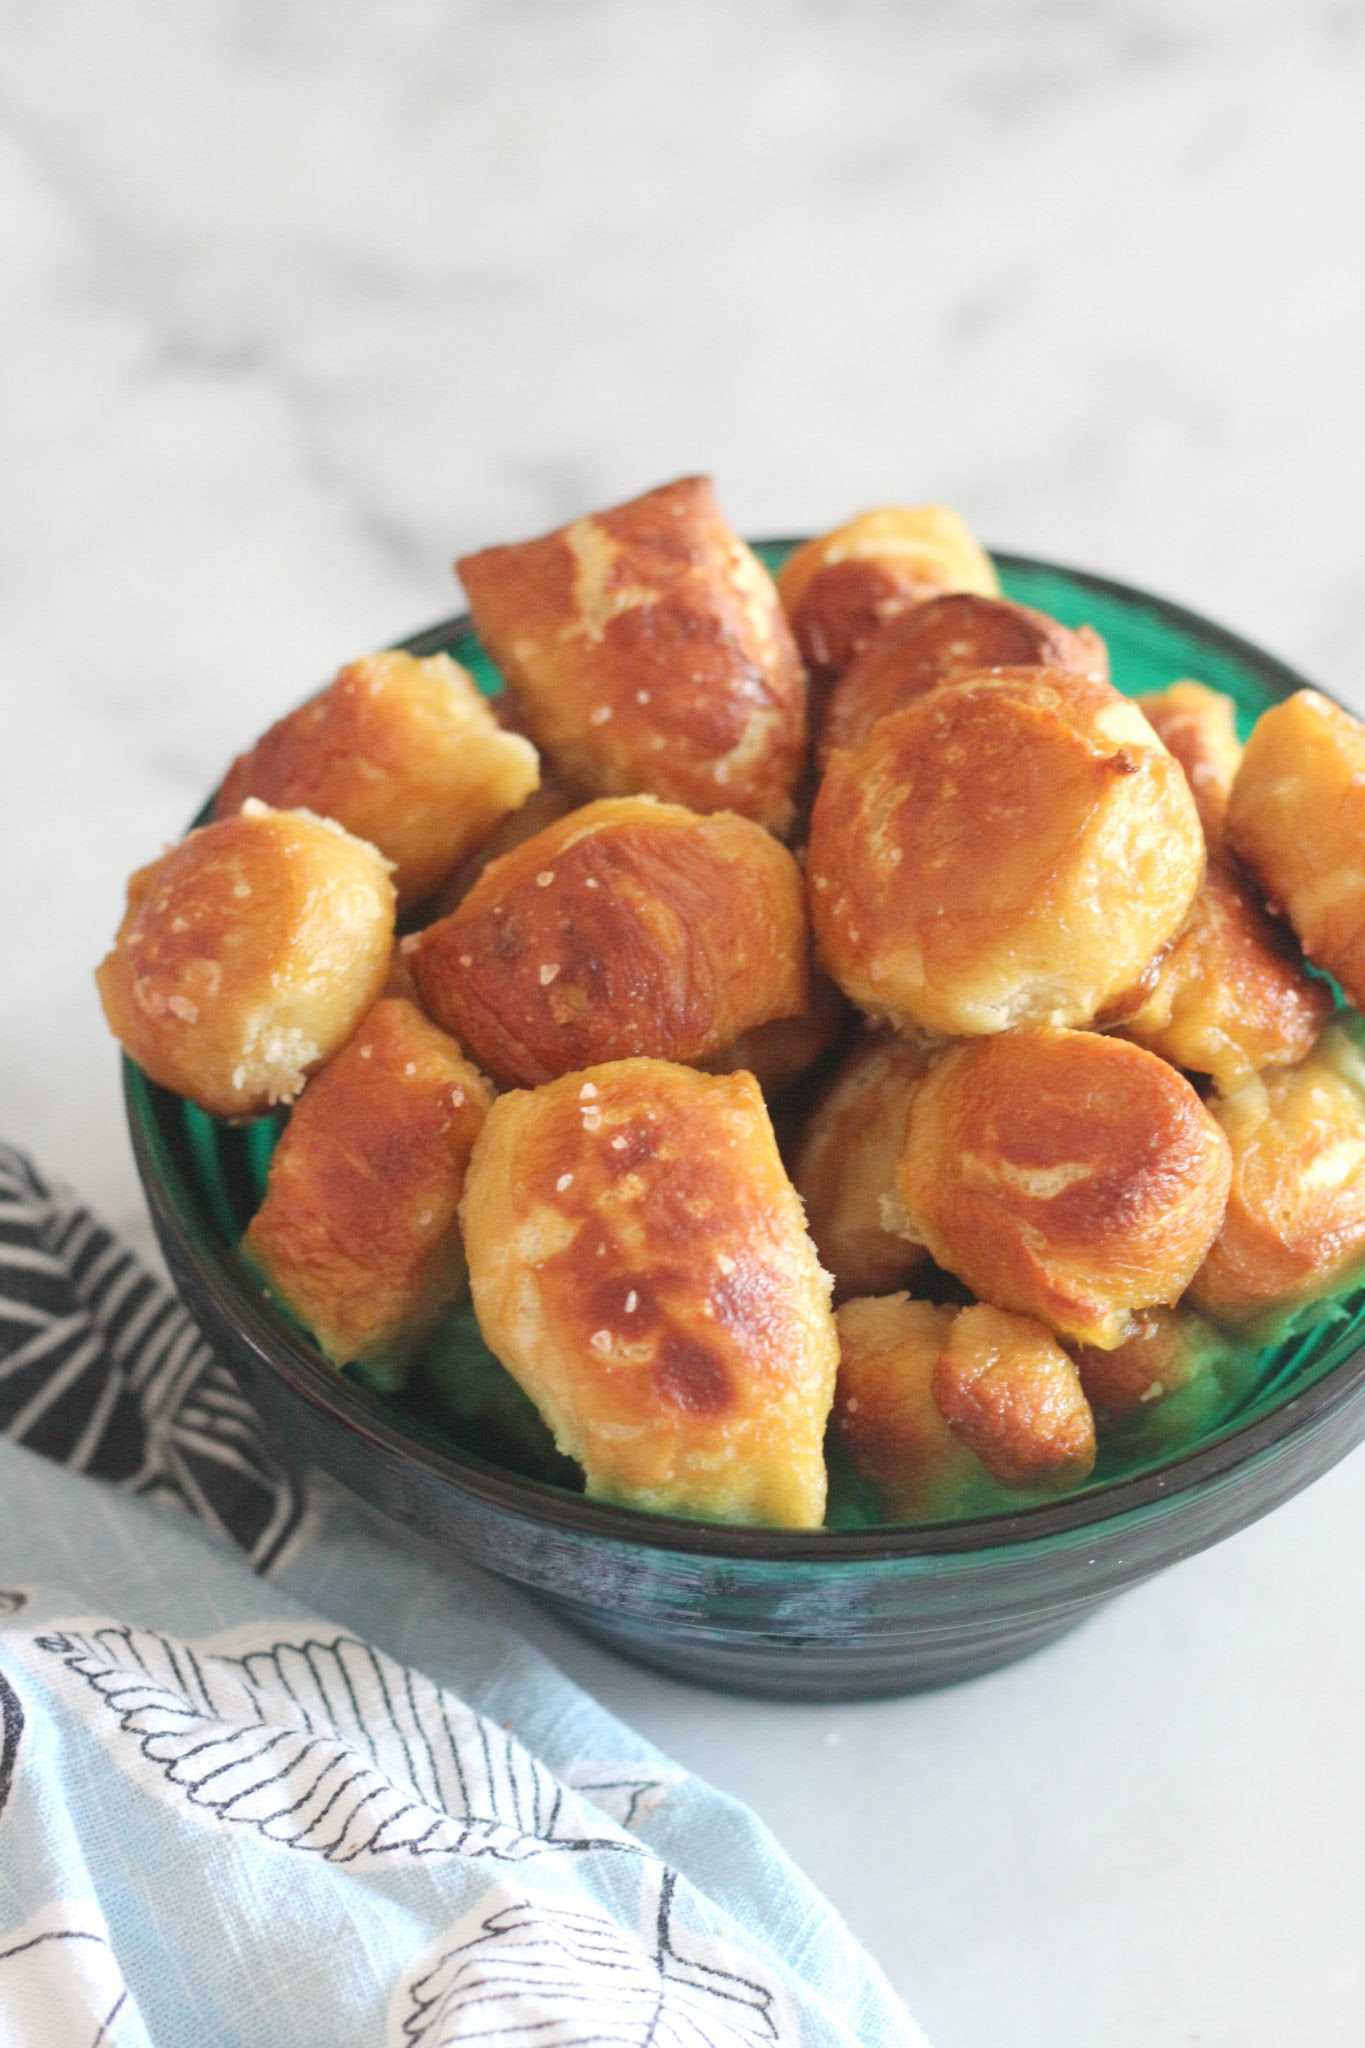 Don't be intimidated by these soft and chewy pretzel bites. They are easy to make at home and taste amazing! These bites are perfect as a party food or an after school snack!